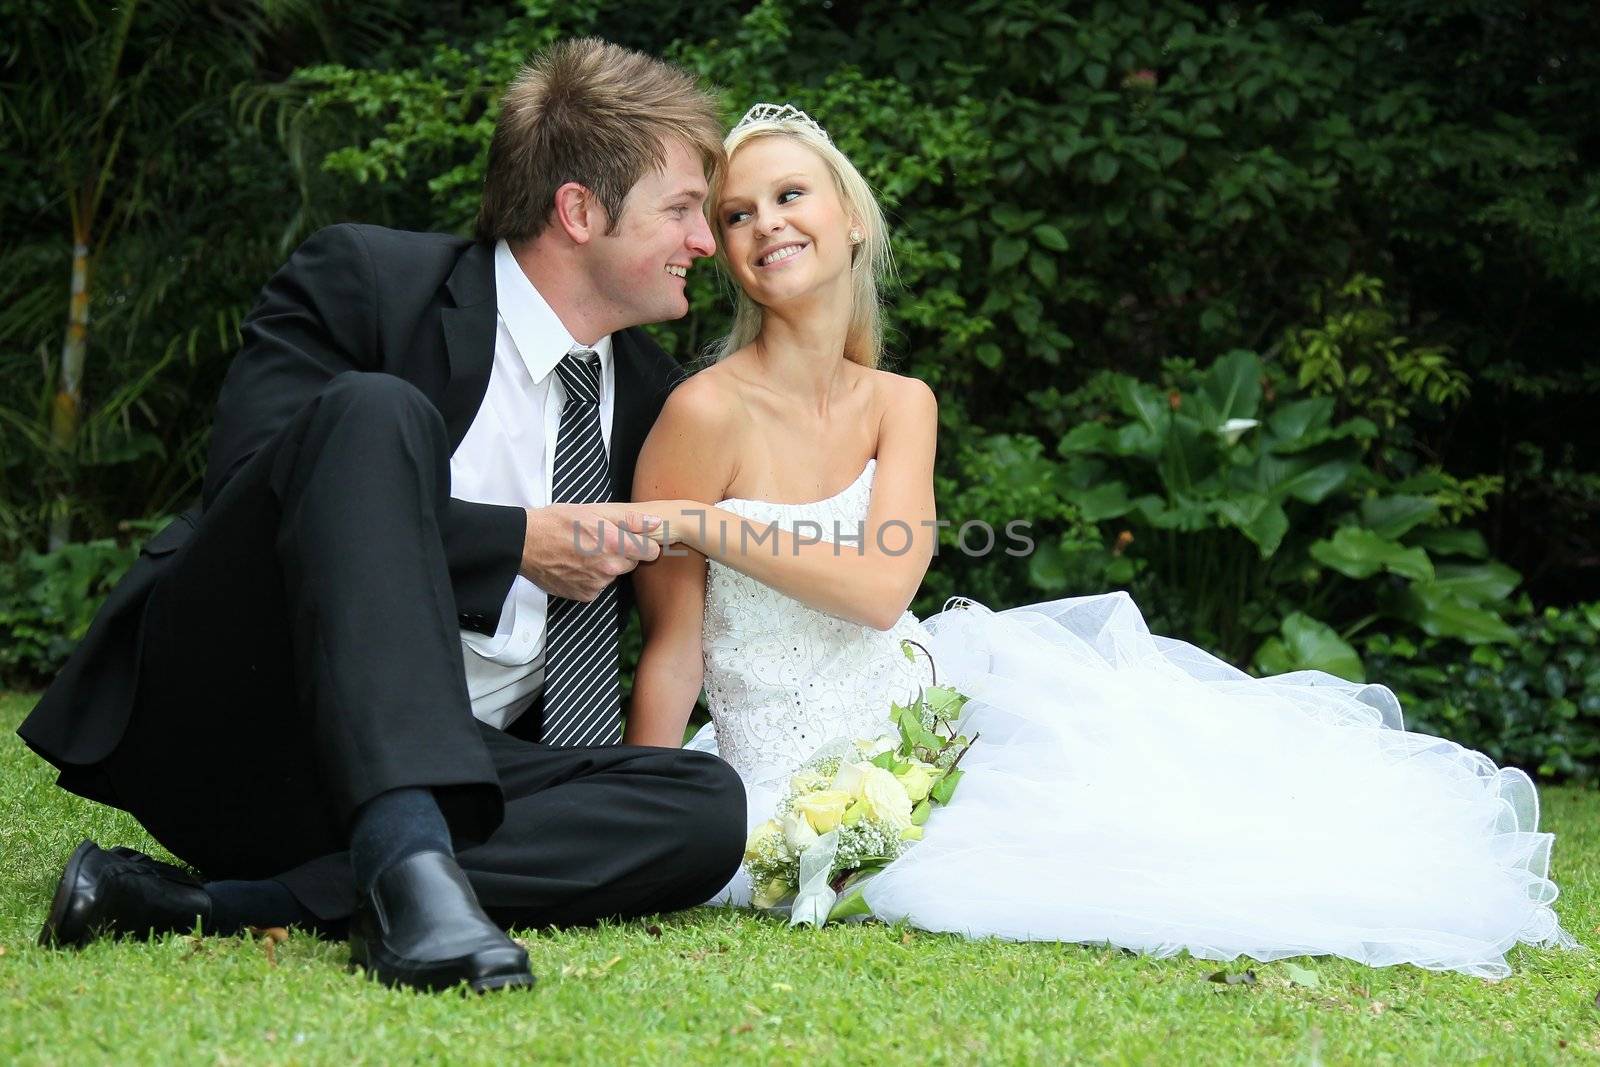 Lovely young couple sitting together on their wedding day